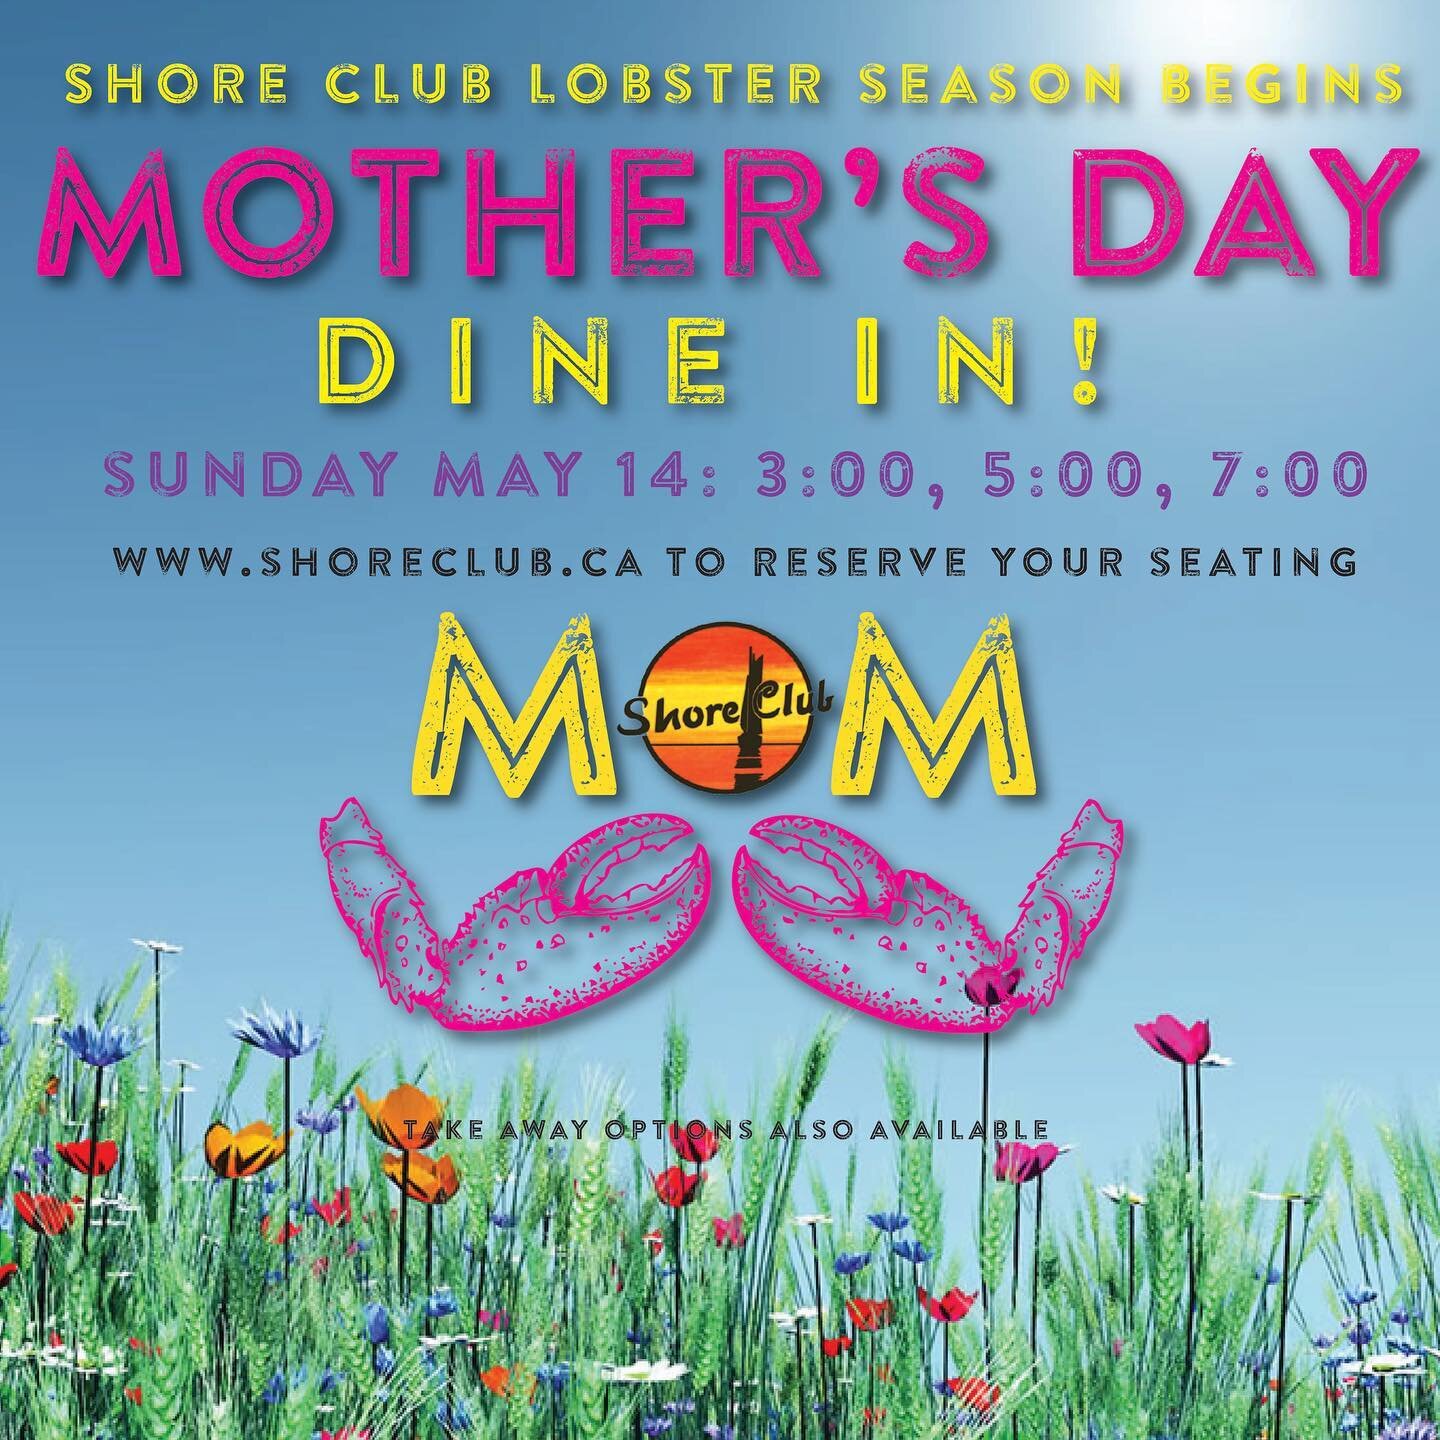 Our first lobster boil of our 87th season begins tomorrow. We have very limited seating remaining. Request a reservation at www.shoreclub.ca 
.
.
#mothersday #lobster #shoreclub #hubbards #halifax #novascotia